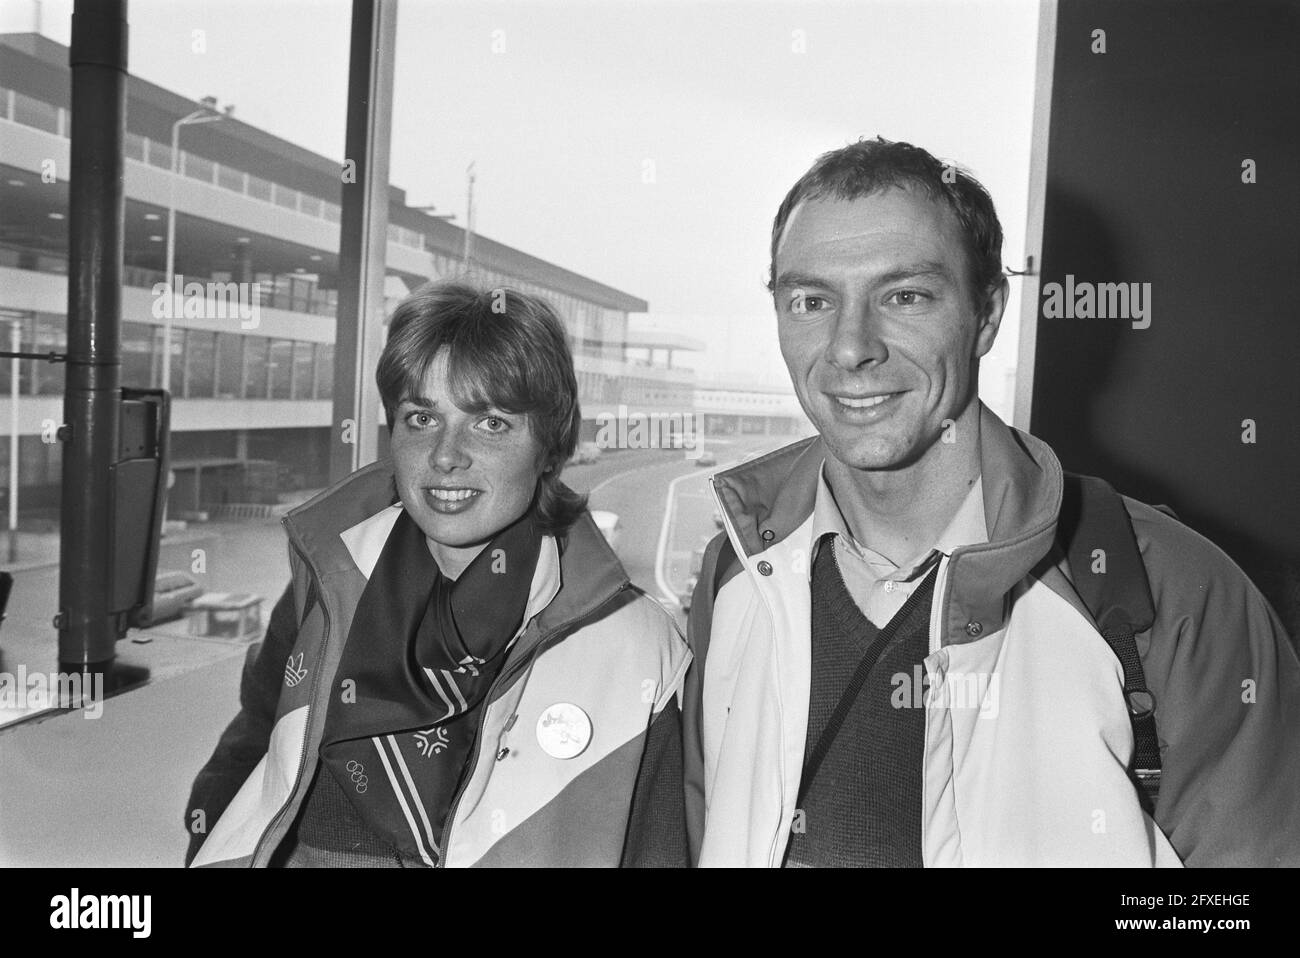 Return of Olympic team from Sarajevo at Schiphol; Ria Visser and Hilbert van der Duim on arrival, February 20, 1984, skating, sports, The Netherlands, 20th century press agency photo, news to remember, documentary, historic photography 1945-1990, visual stories, human history of the Twentieth Century, capturing moments in time Stock Photo